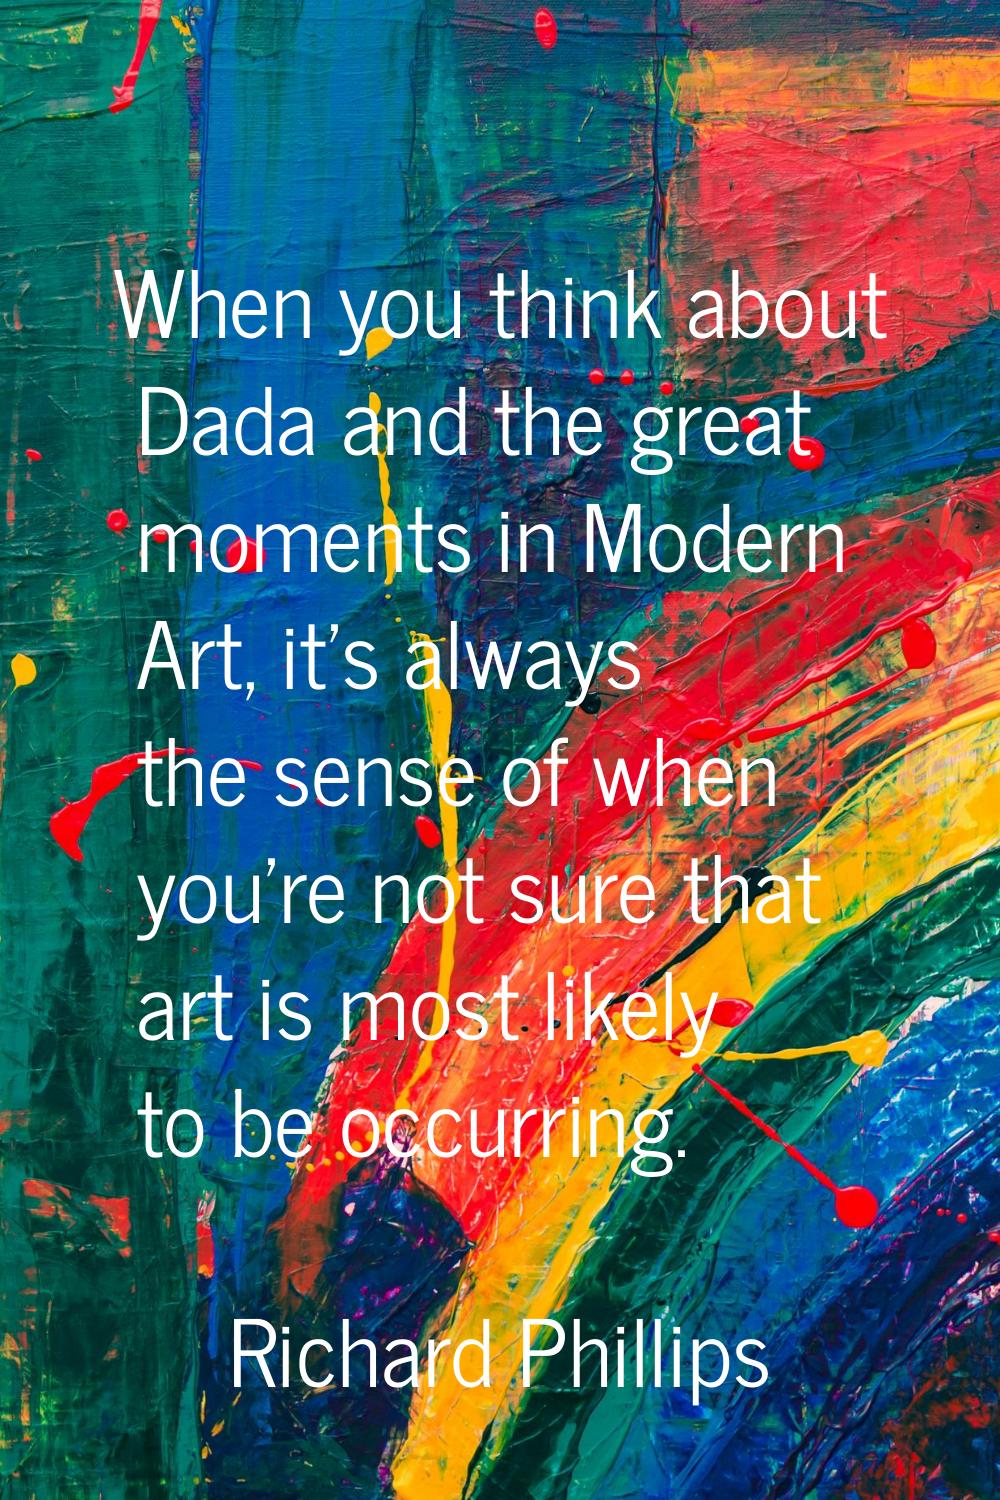 When you think about Dada and the great moments in Modern Art, it's always the sense of when you're